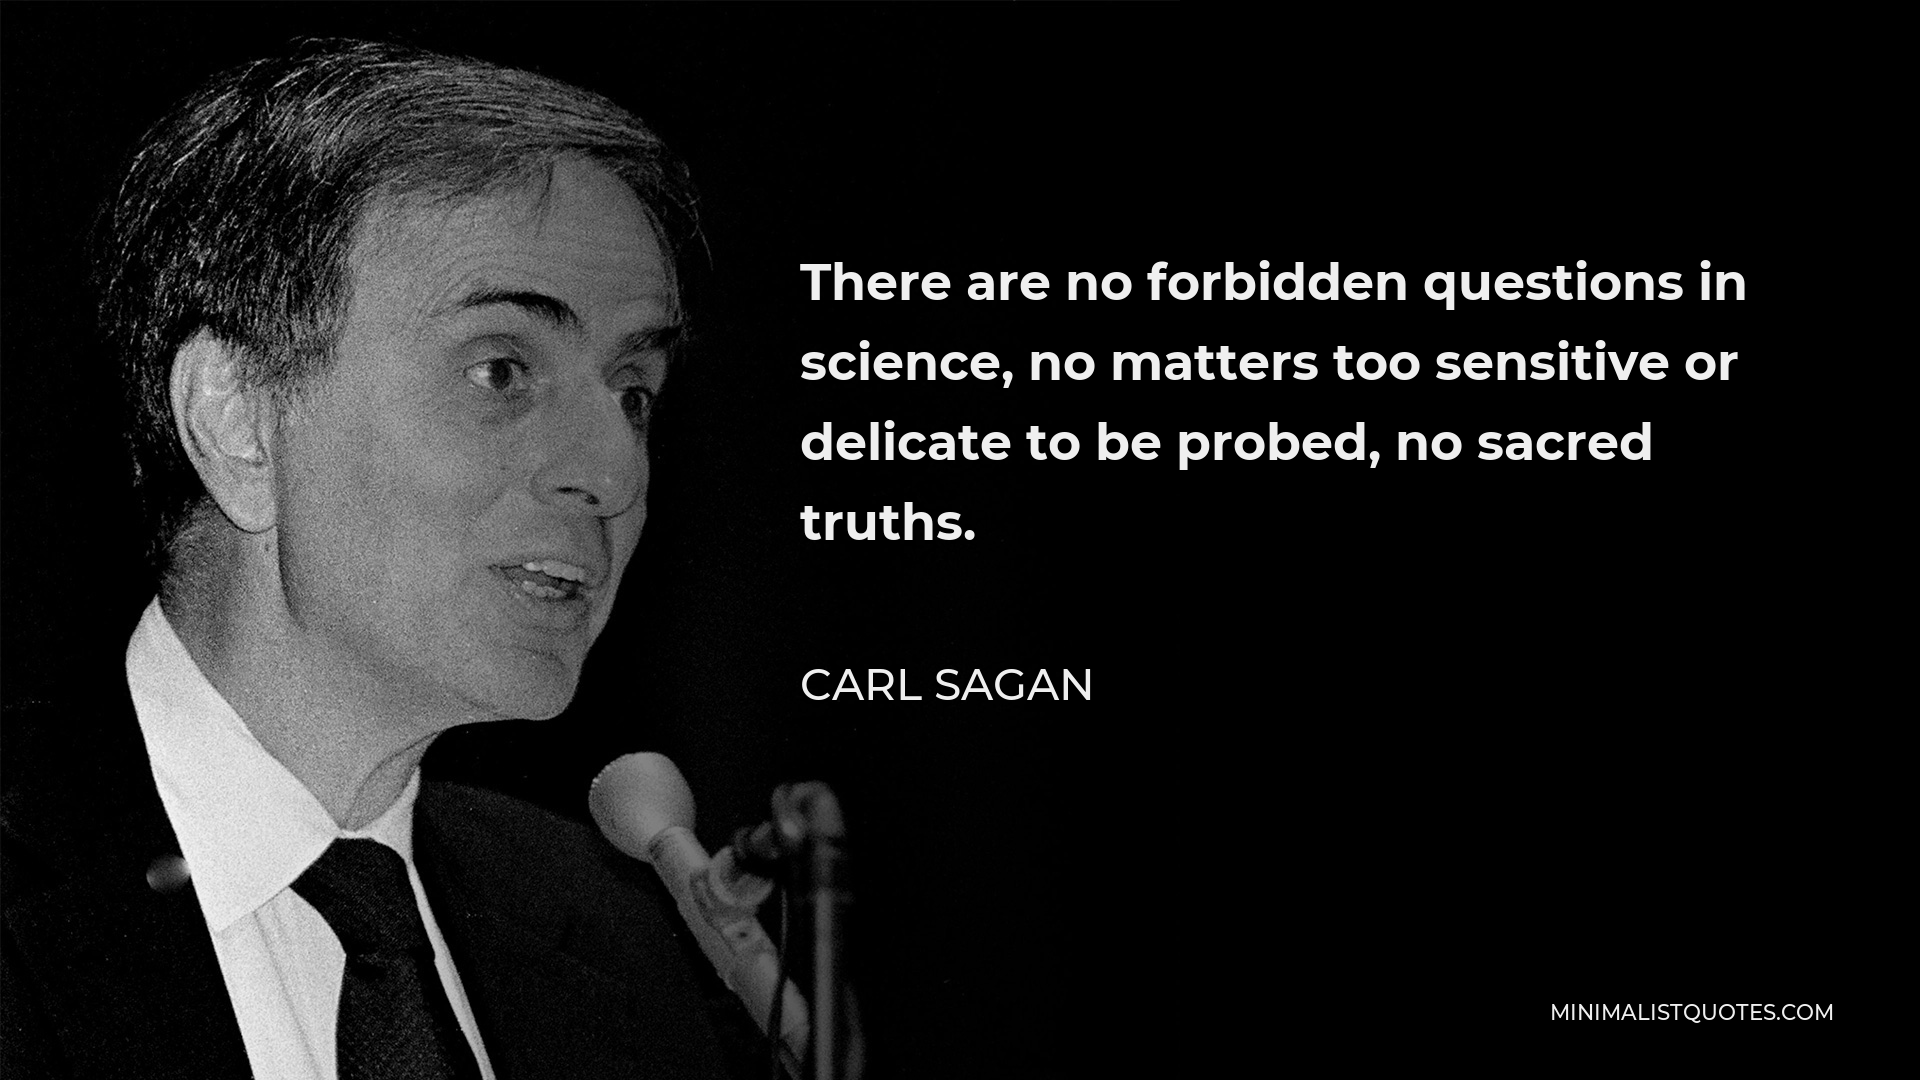 Carl Sagan Quote - There are no forbidden questions in science, no matters too sensitive or delicate to be probed, no sacred truths.